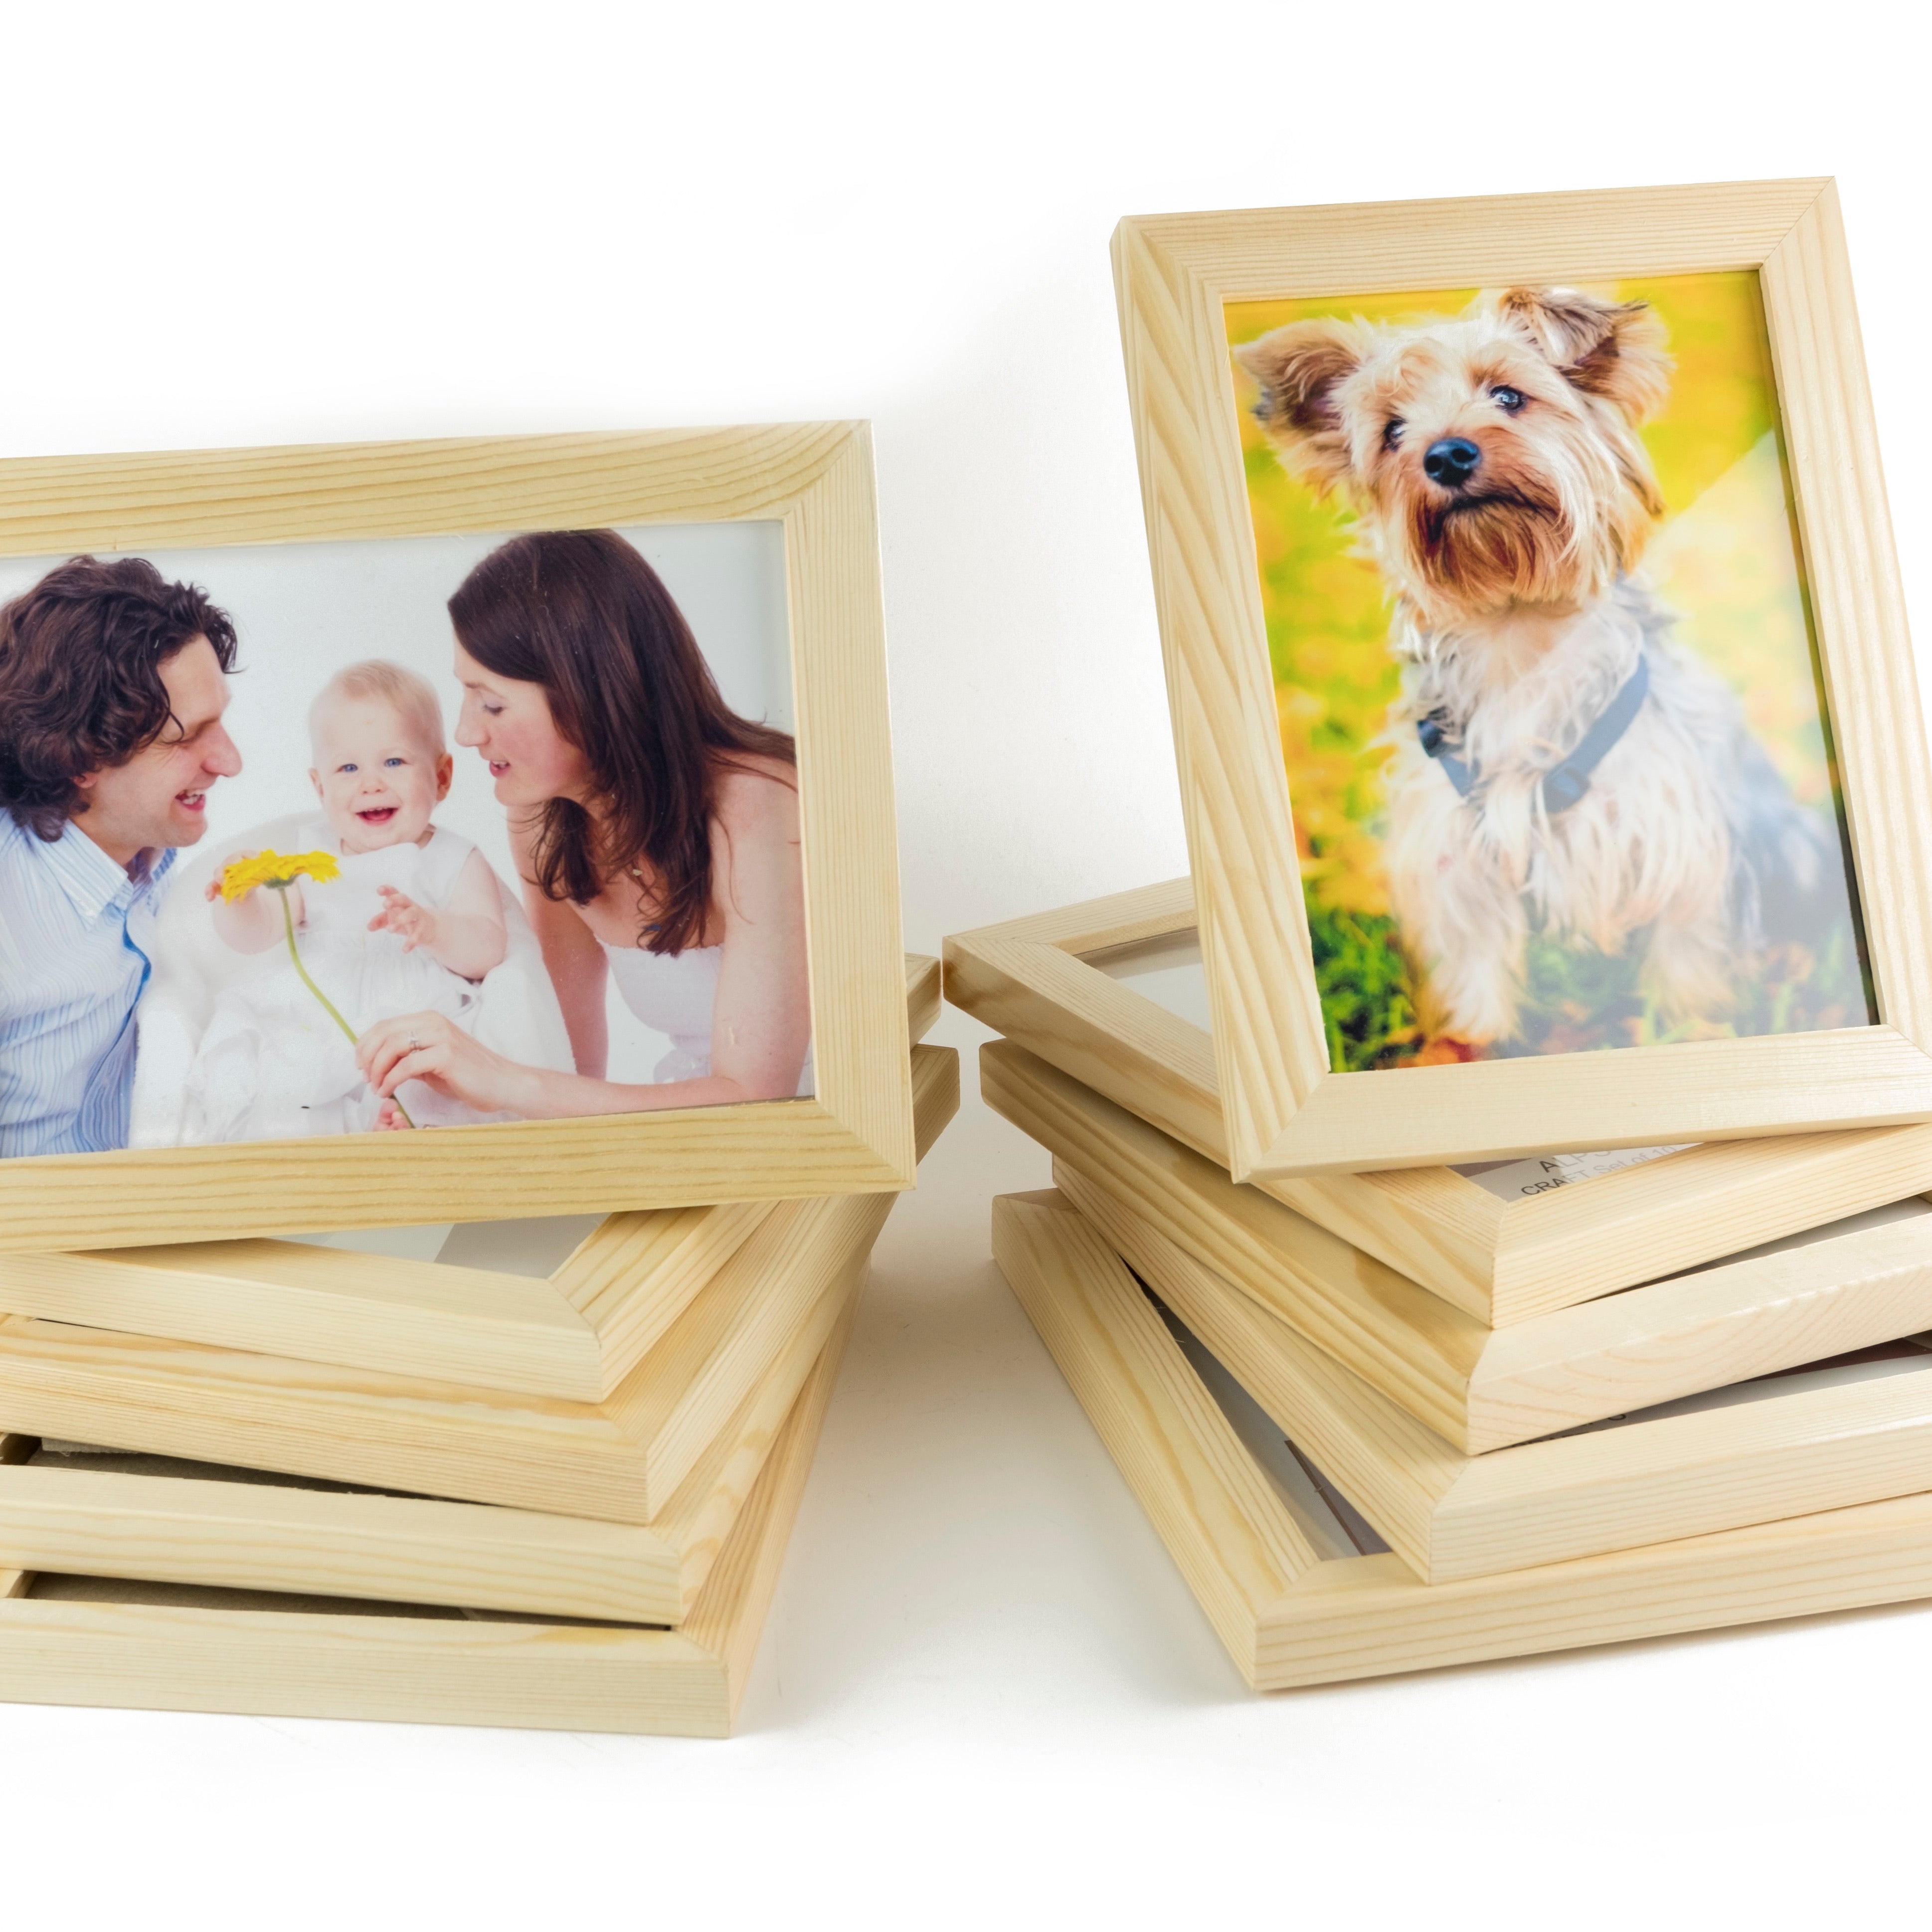 WOODALPS 5" x 7" Wooden Picture Frame - Set of 10 - Wallniture